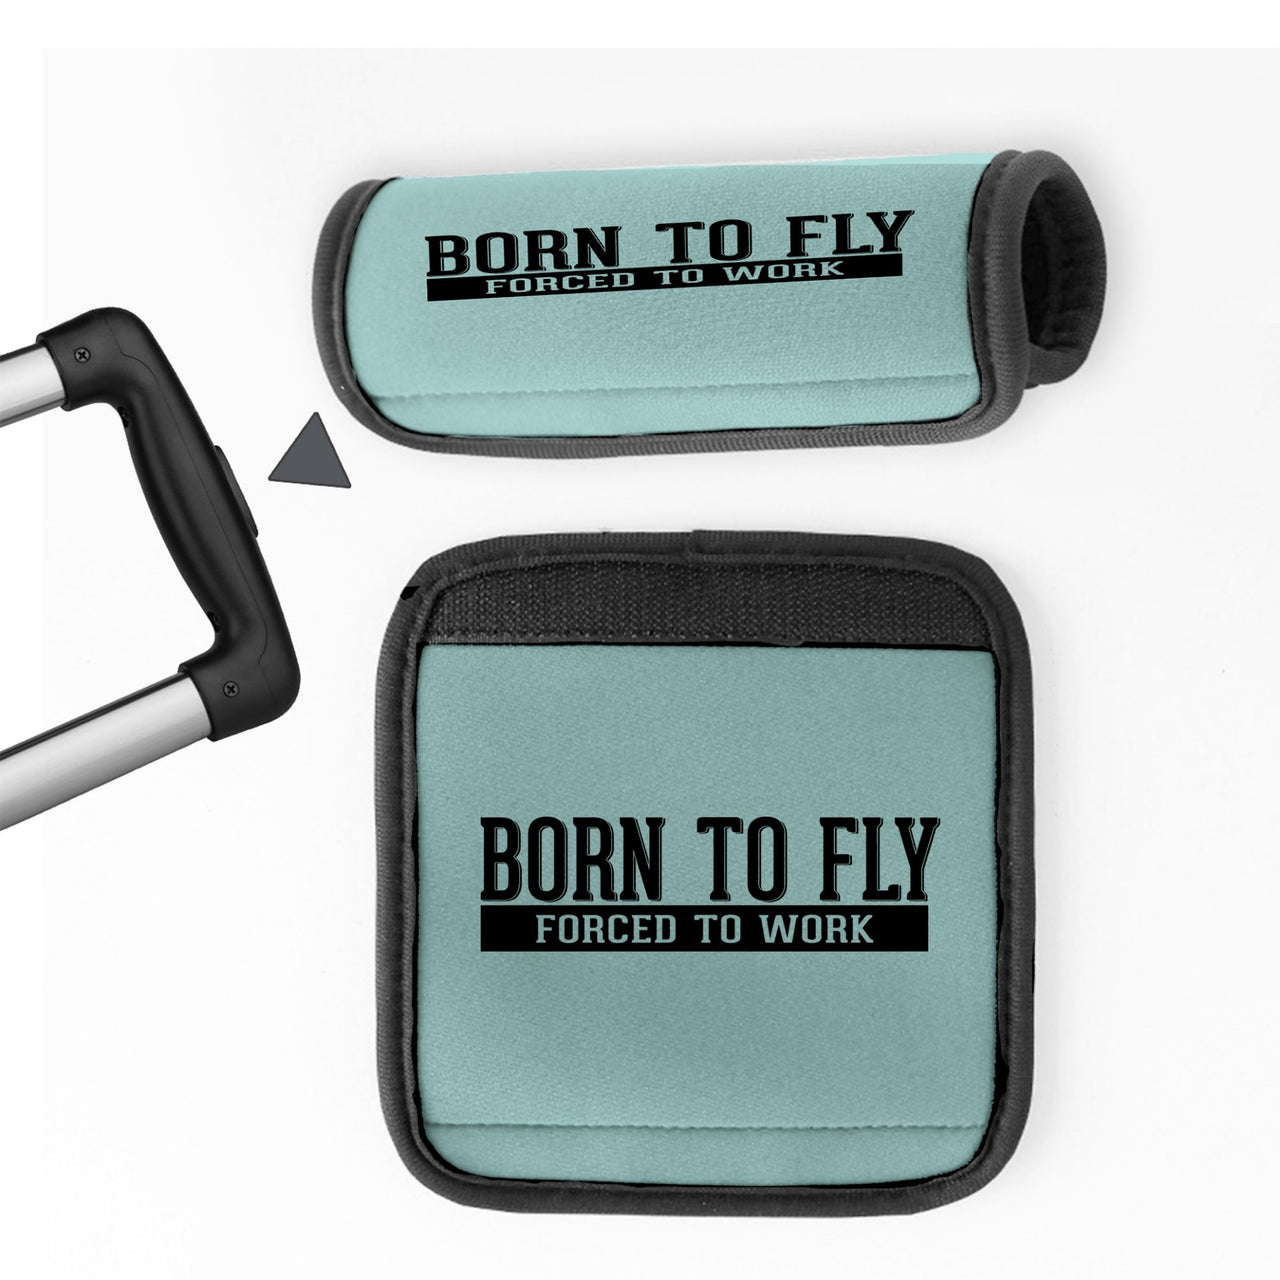 Born To Fly Forced To Work Designed Neoprene Luggage Handle Covers